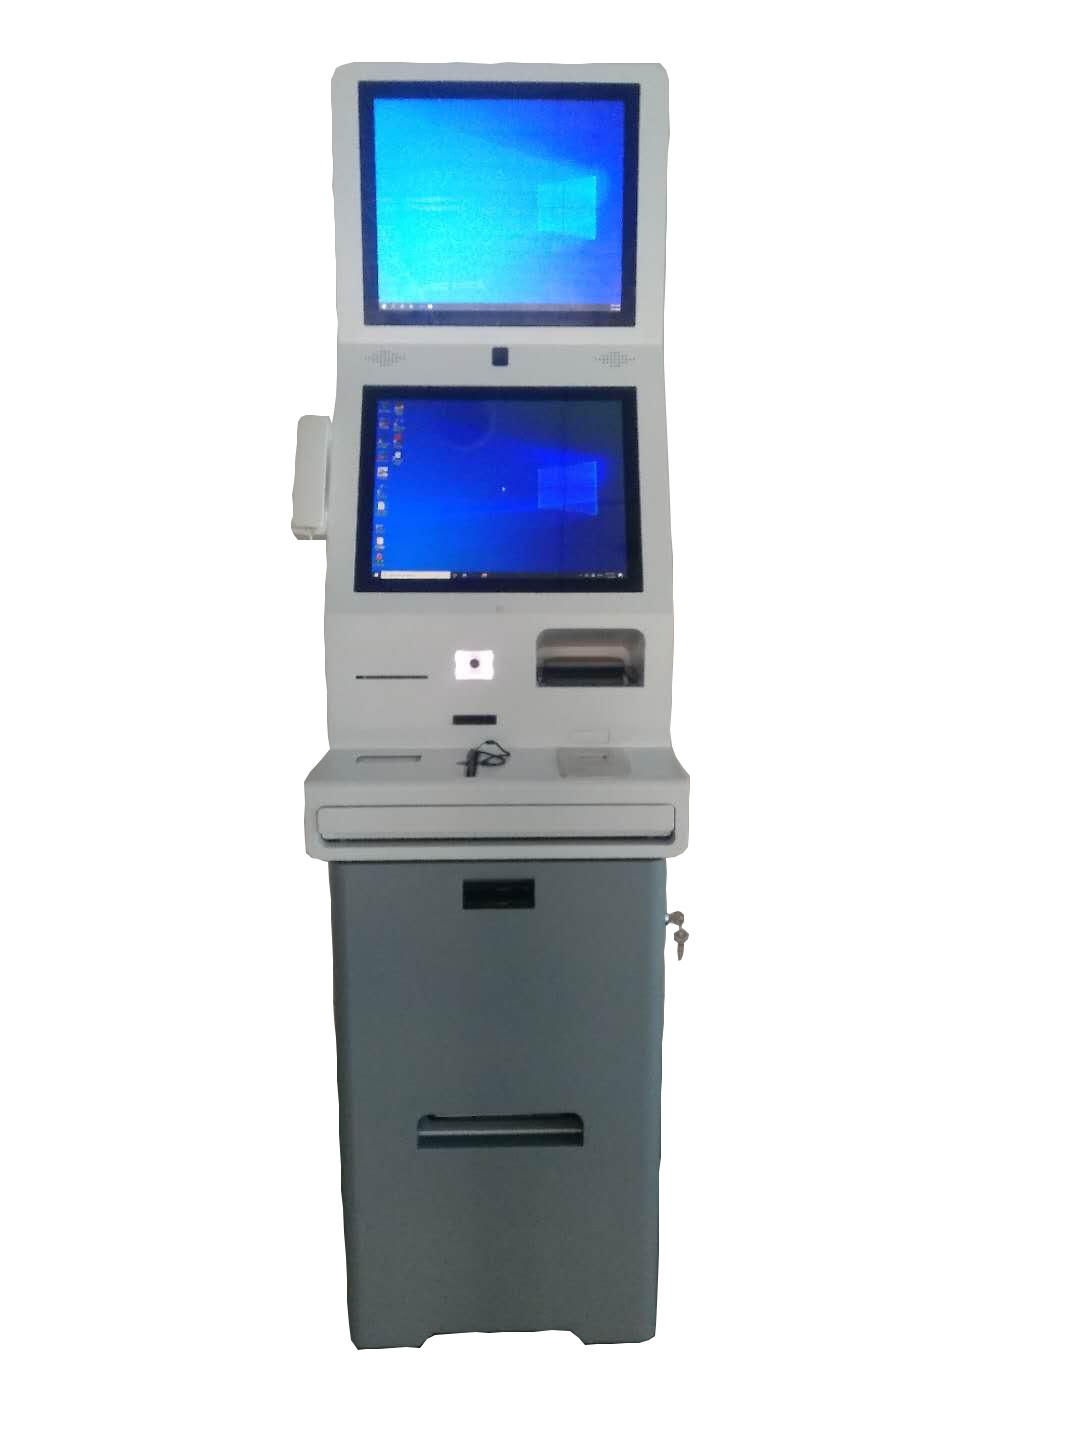 Windows OS Self Service Payment Machine Hotel Check in Kiosk